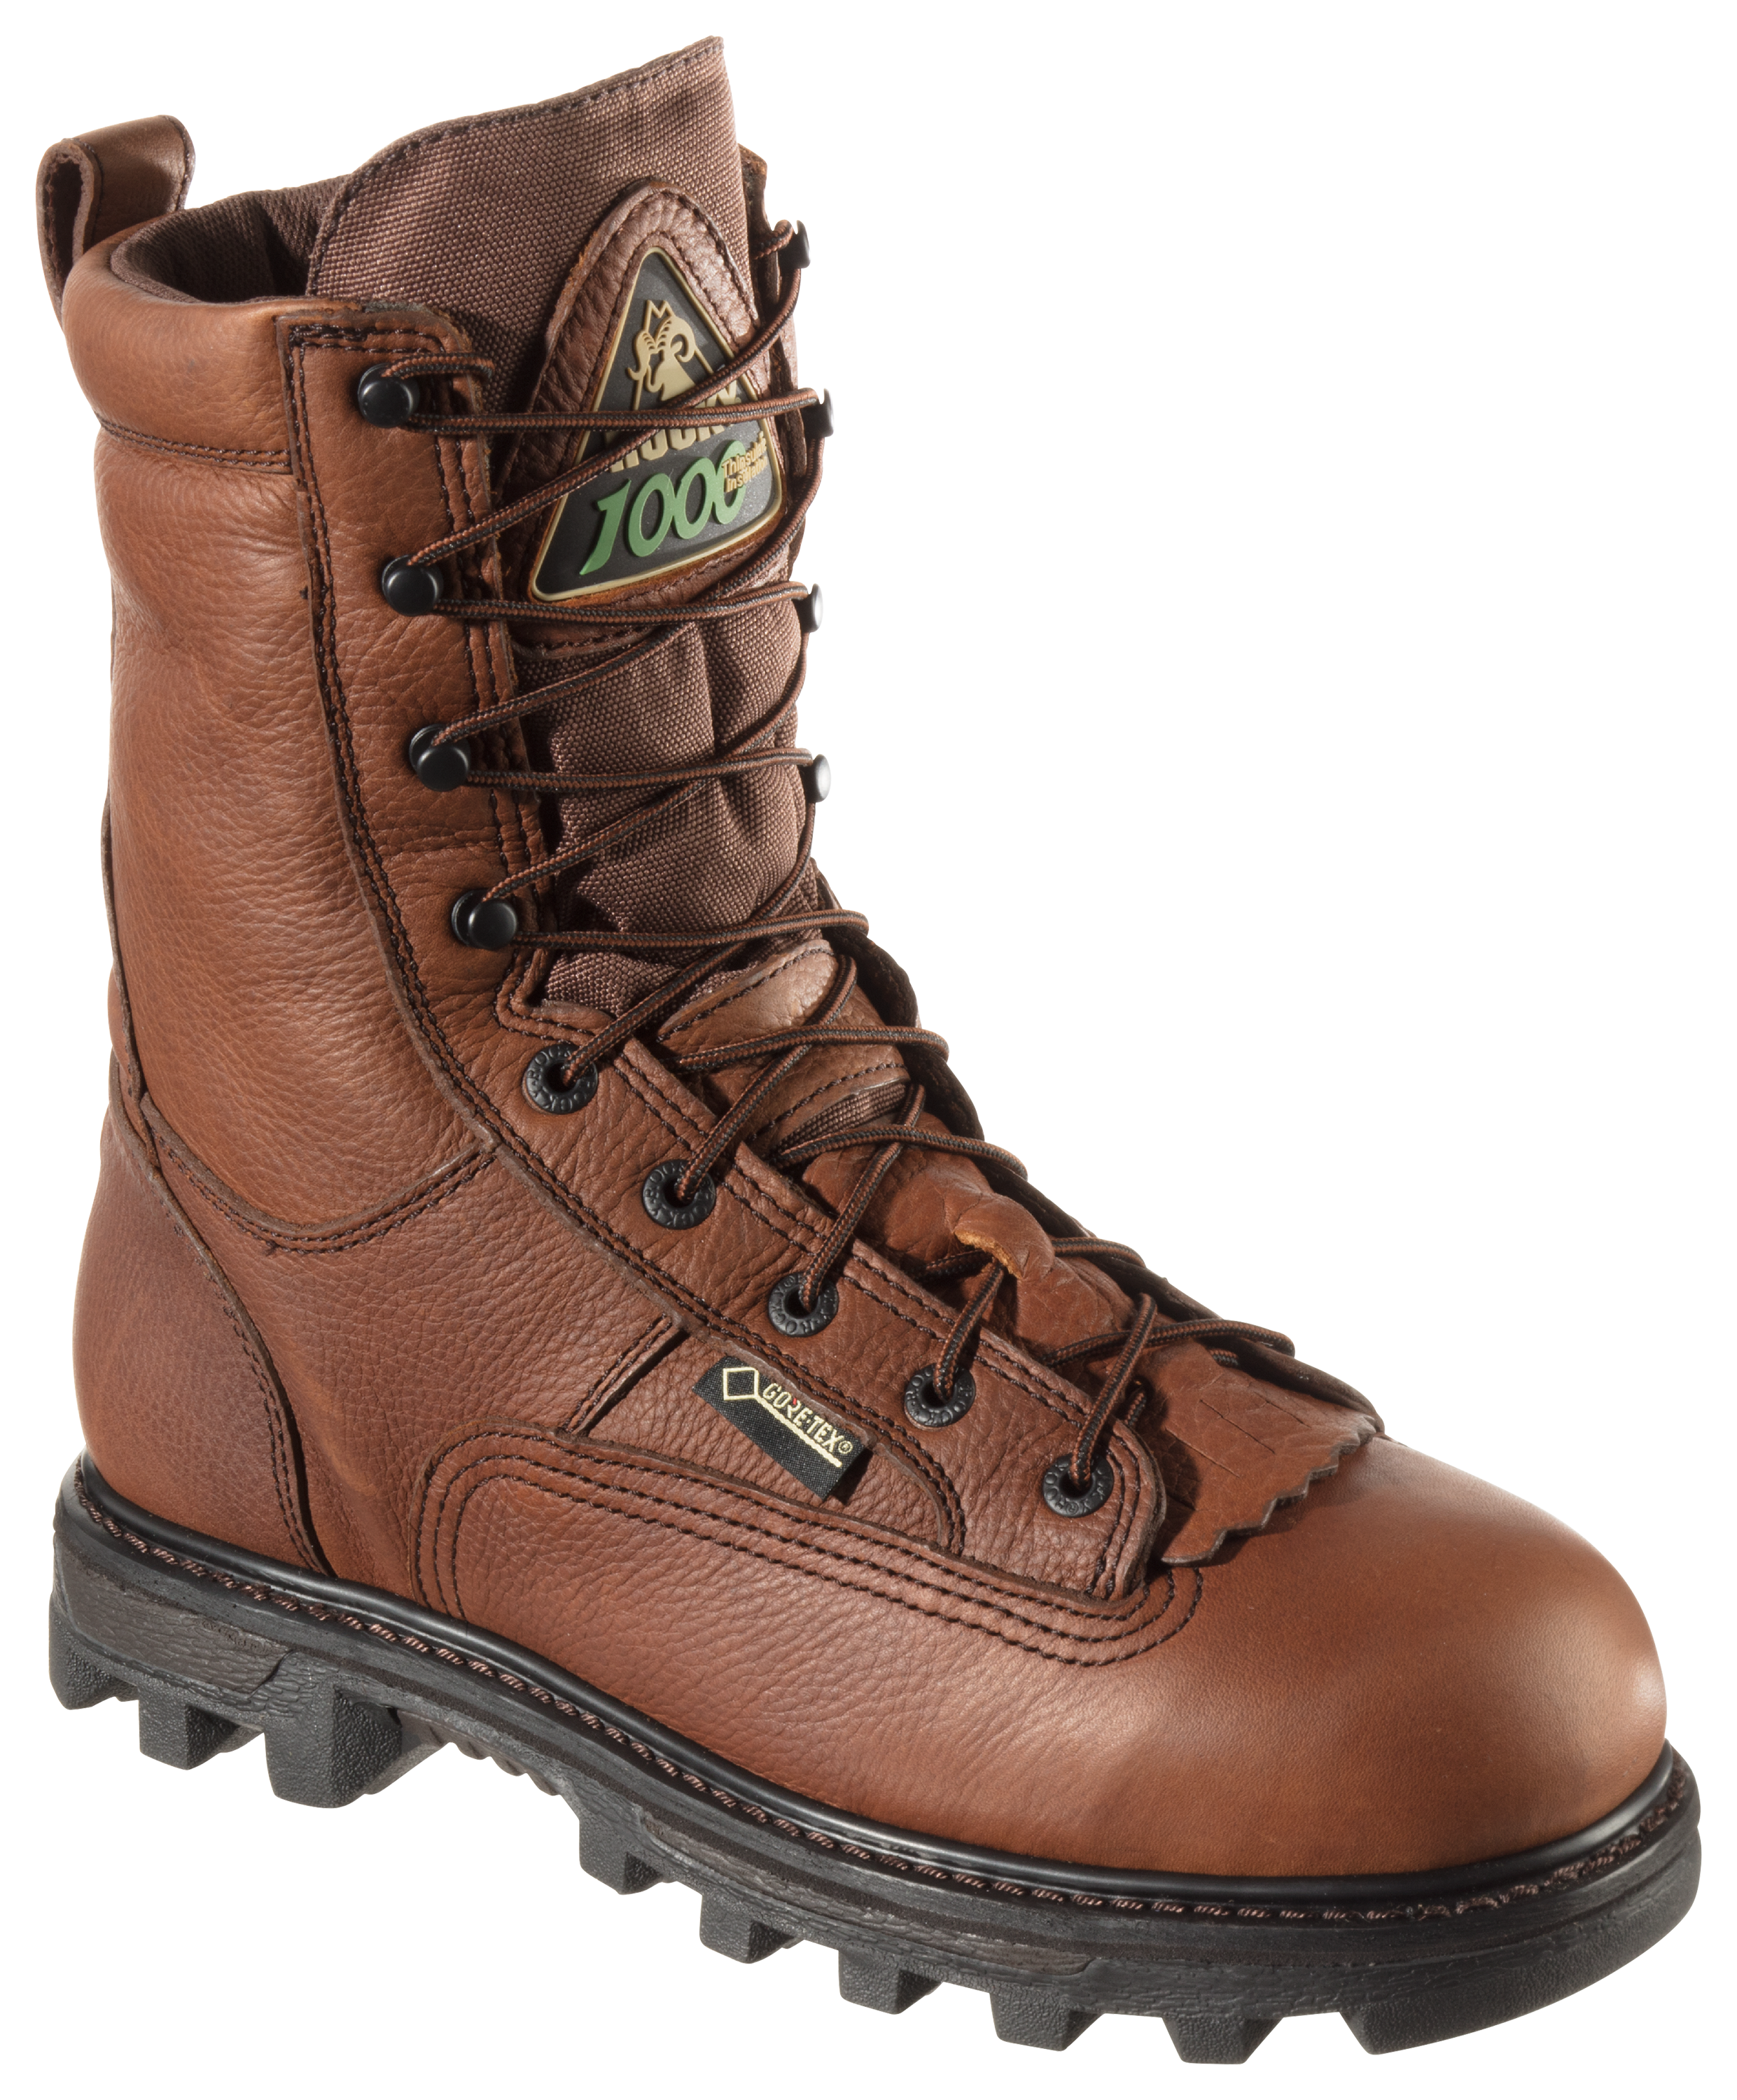 ROCKY BearClaw 3D GORE-TEX 1,000-Gram Insulated Hunting Boots for Men - Brown - 9W